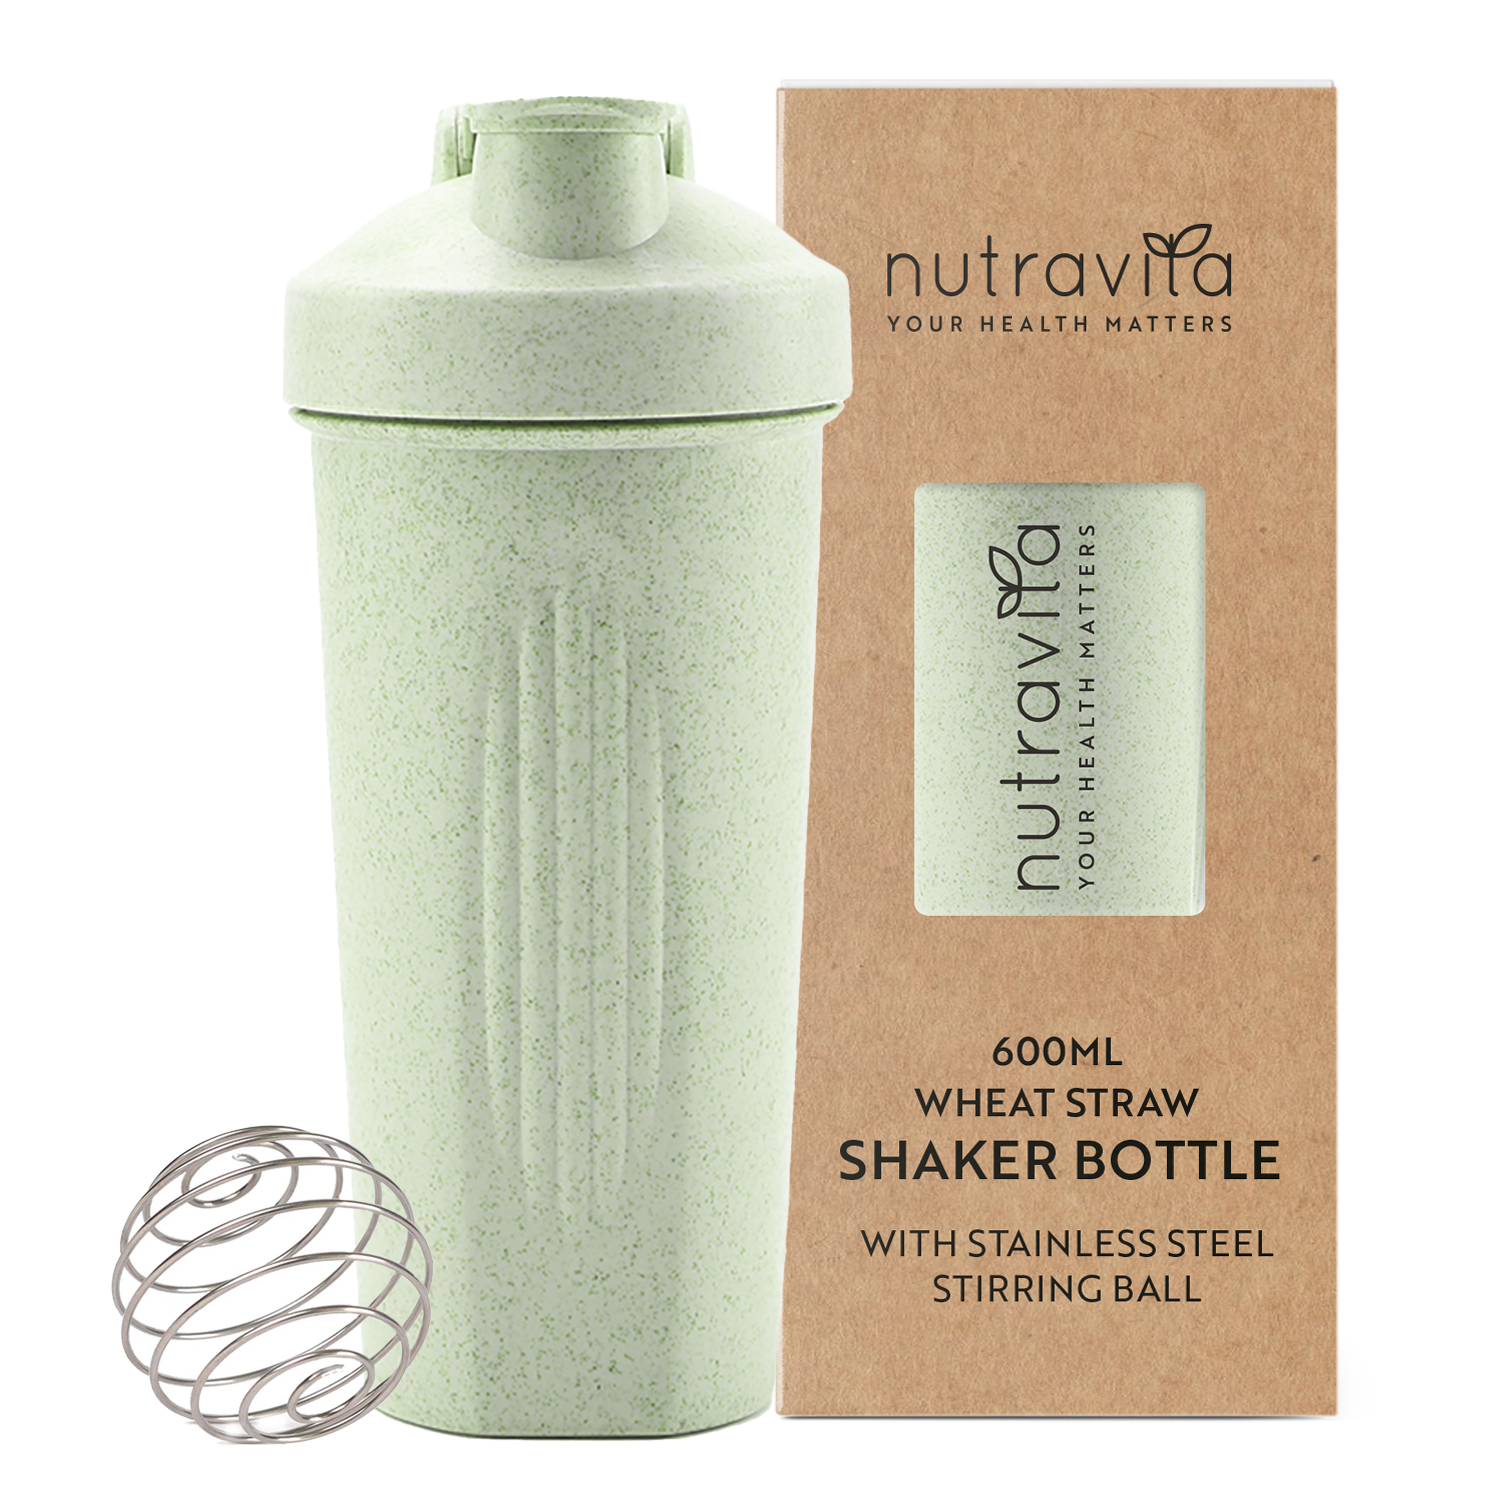 Wheat Straw Shaker Bottle 600ml - Ideal for Protein Shakes and Powder Supplements Biodegradable 50% Eco-Friendly Wheat Straw Plastic